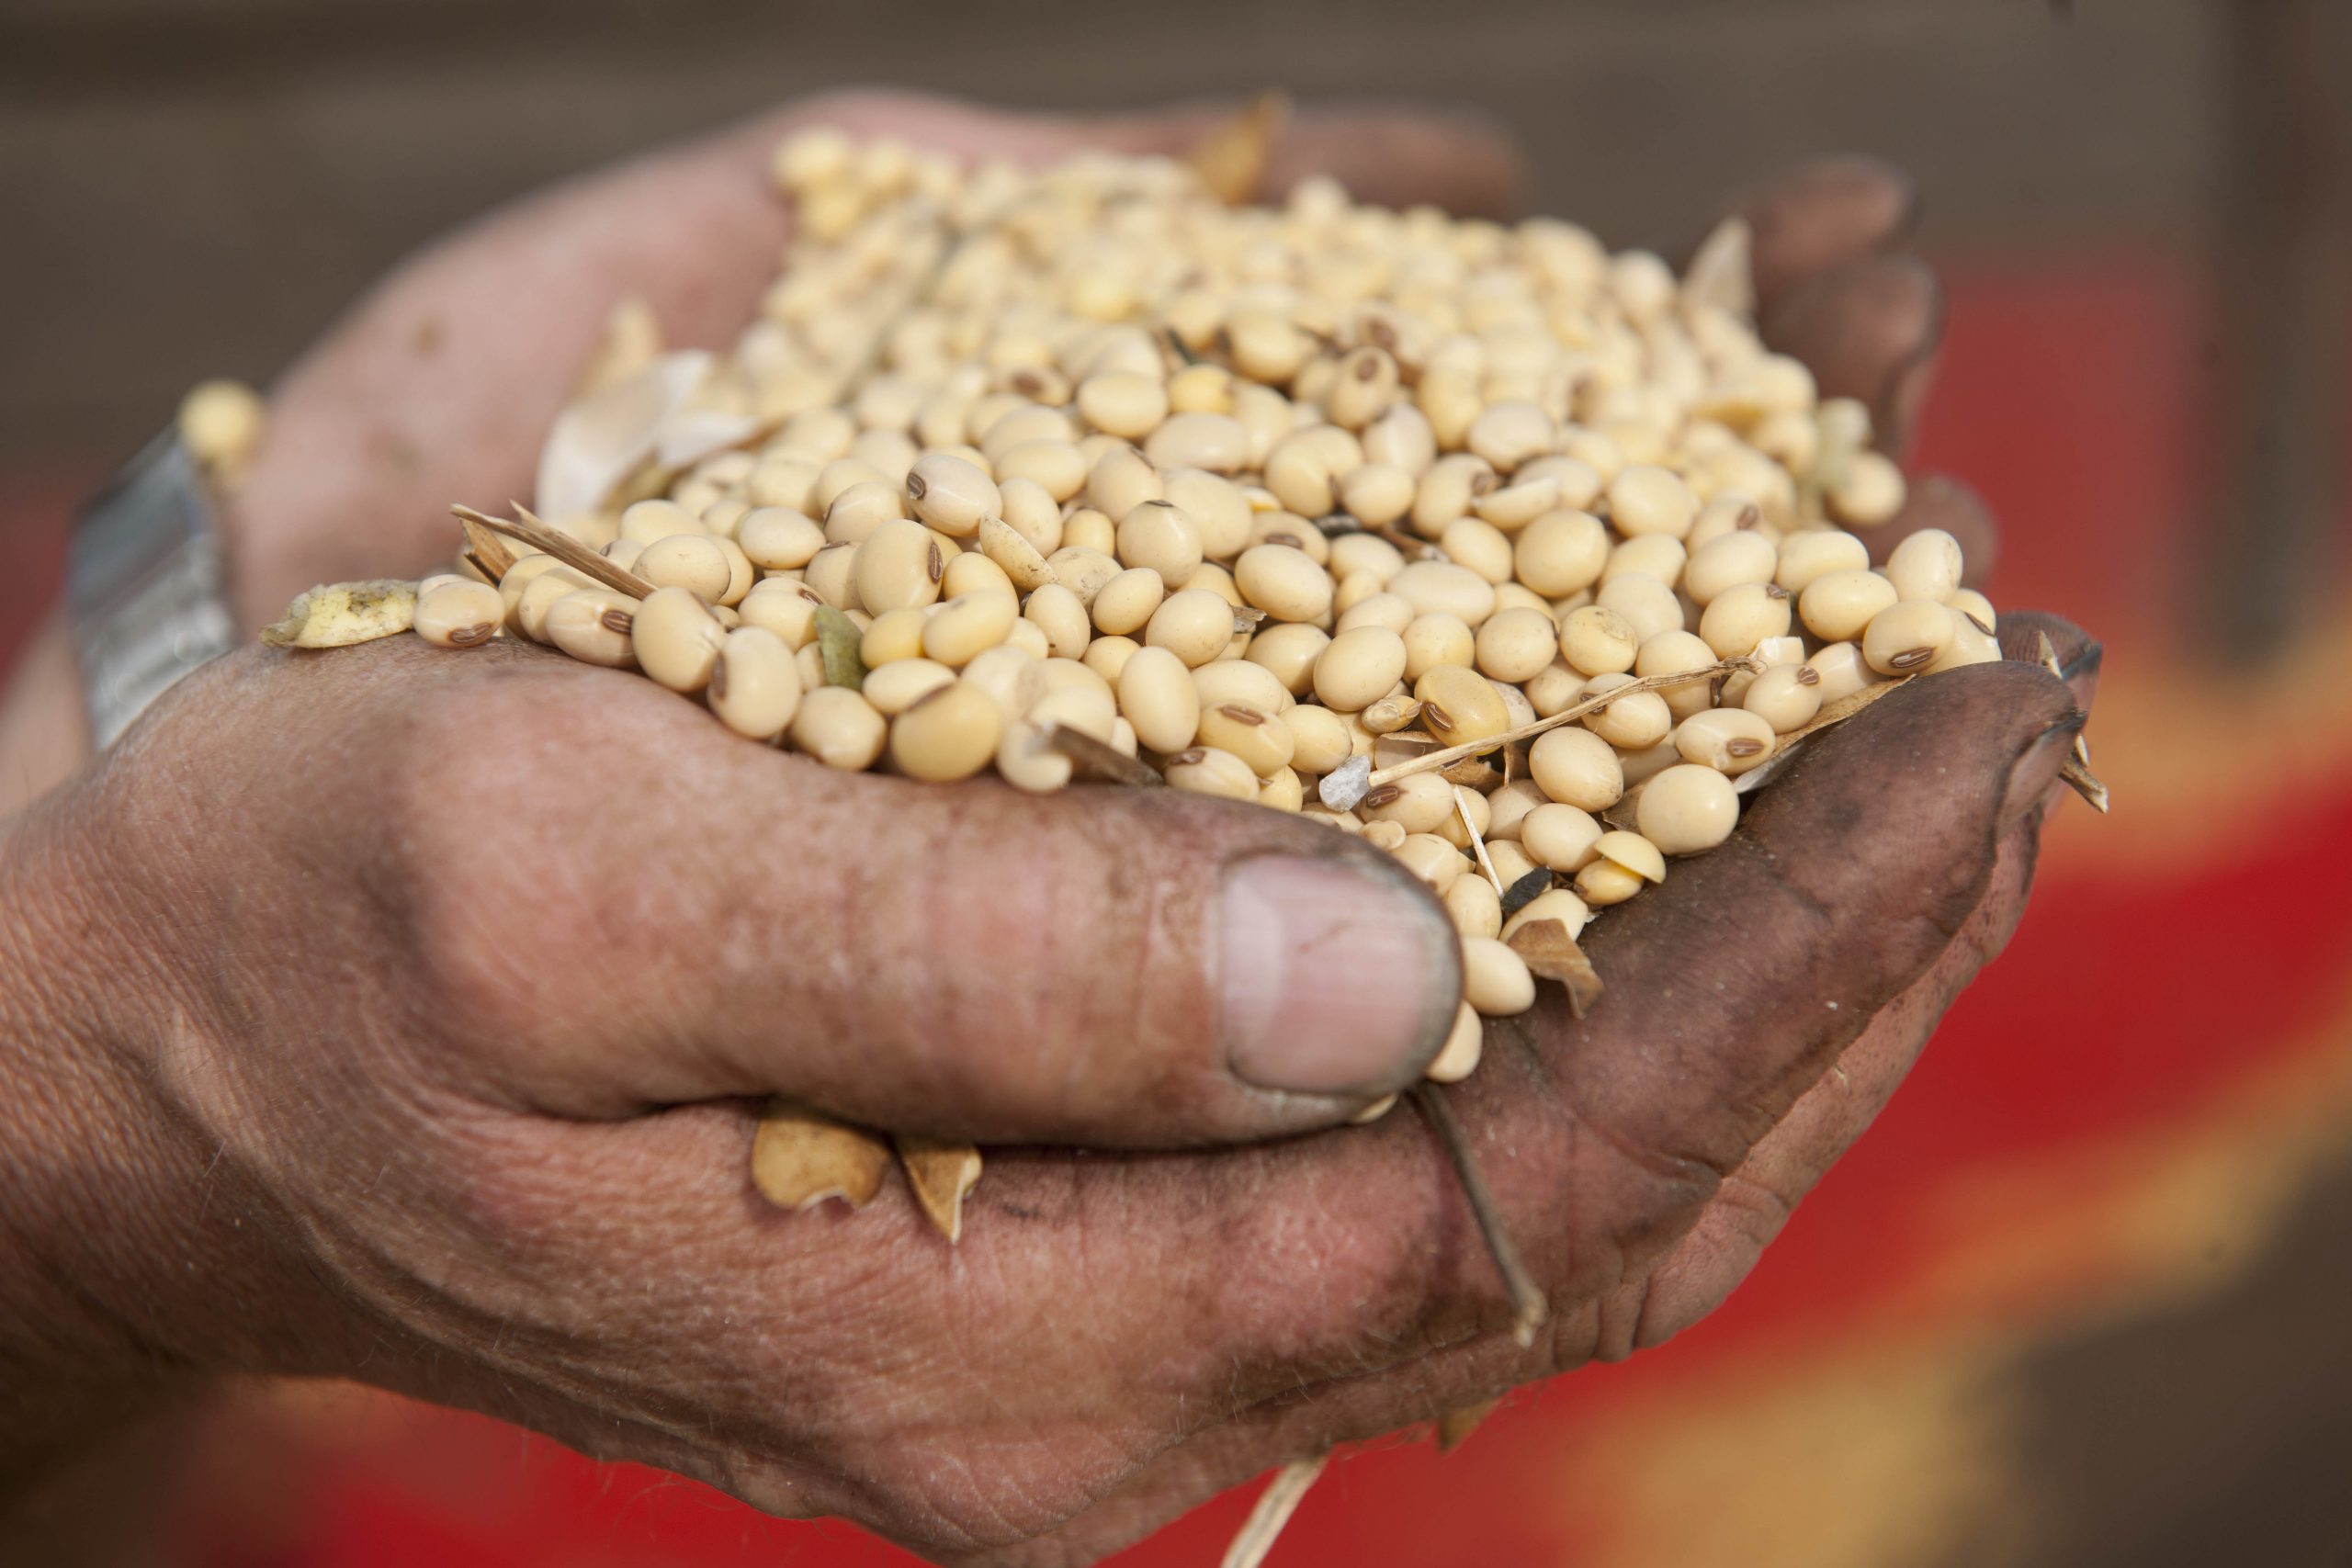 Stepping up market demand for responsible soy